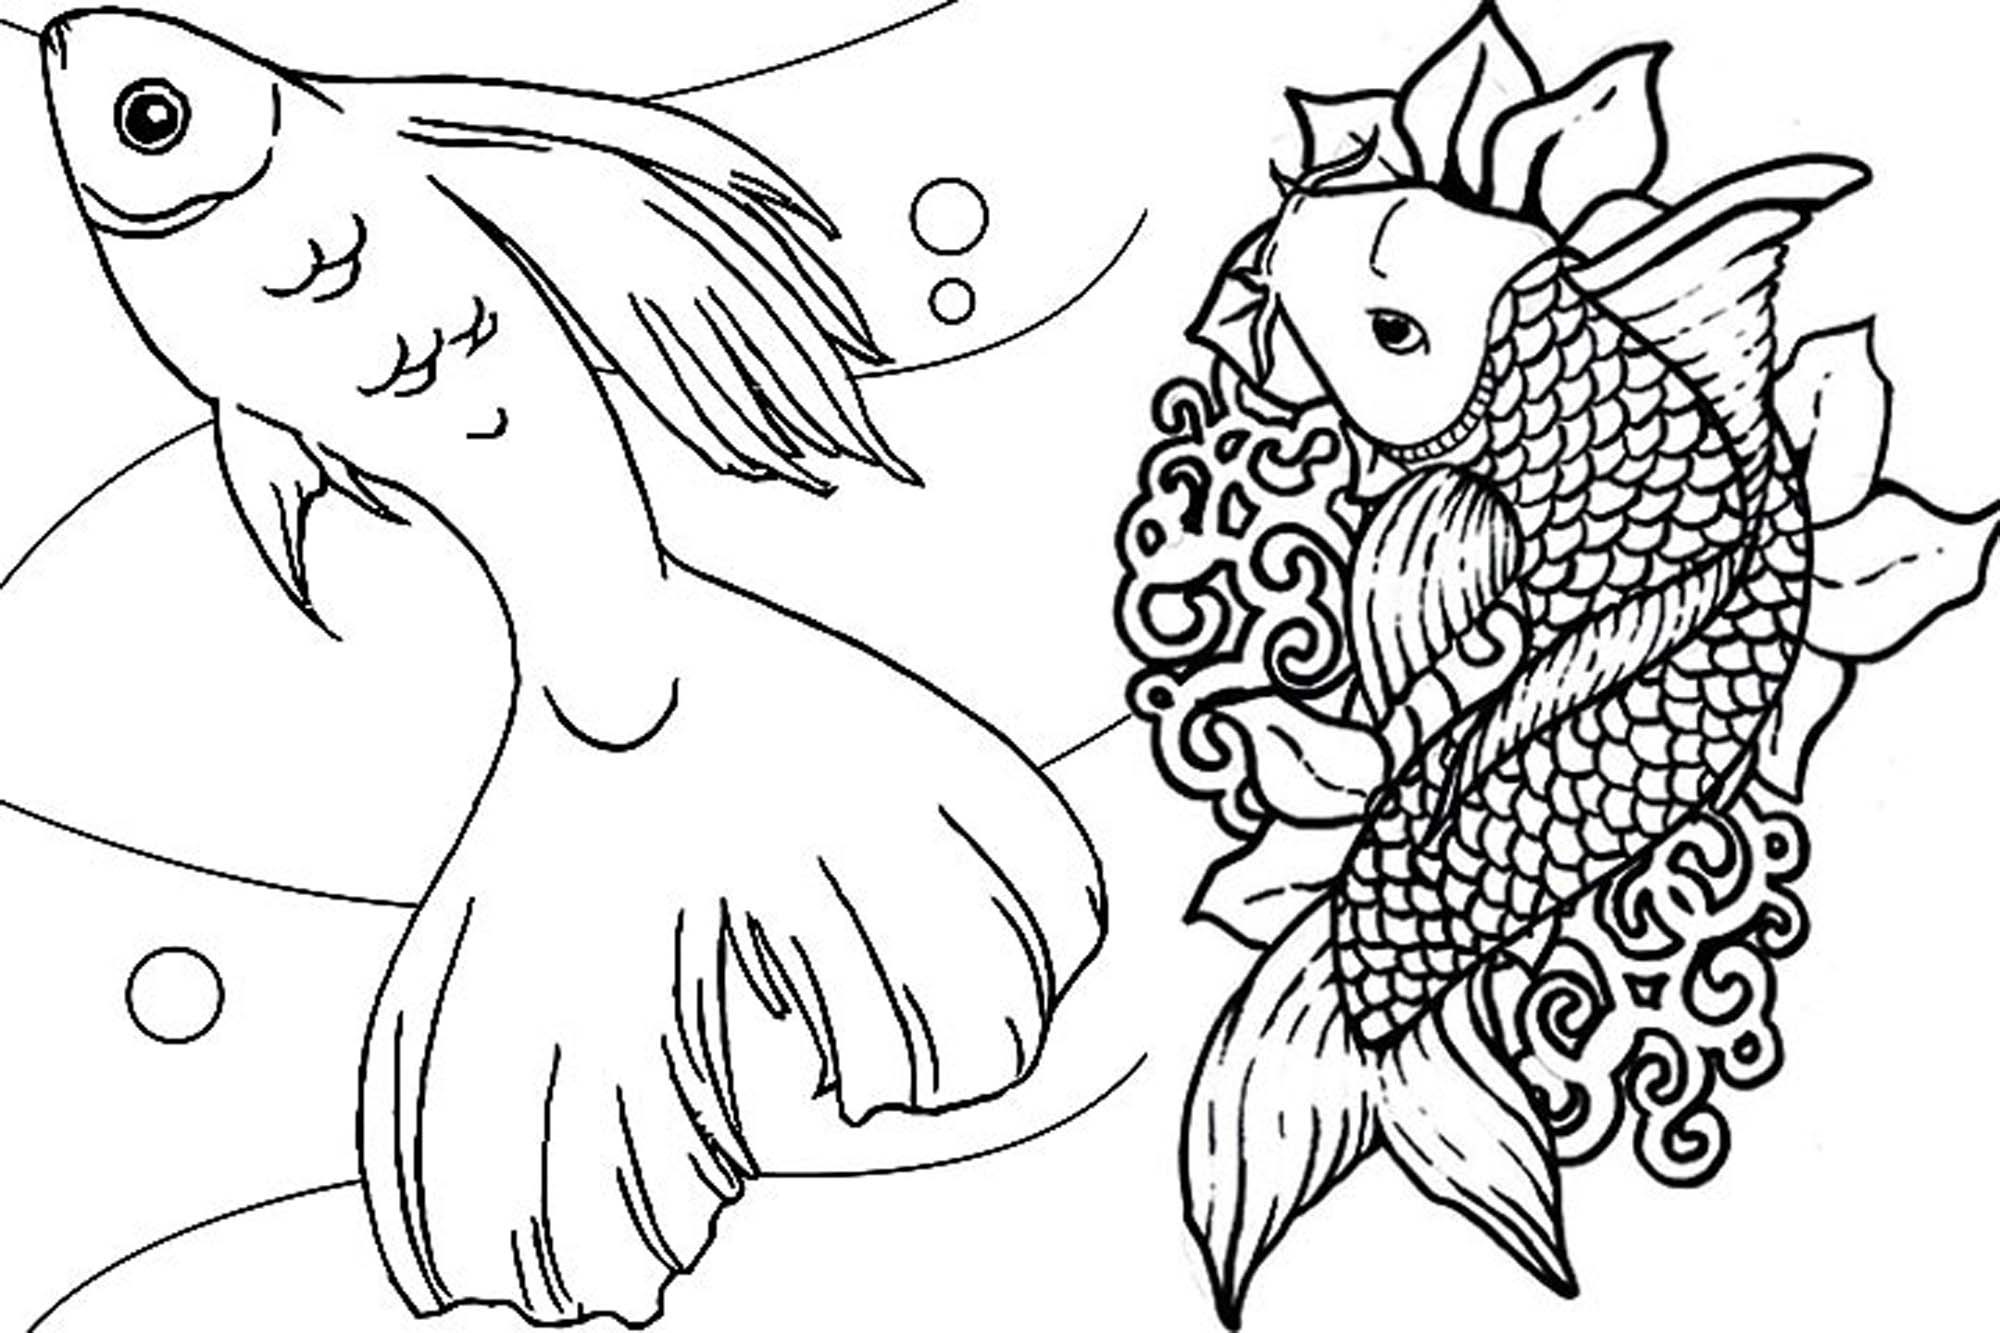 rainbow-fish-coloring-page-at-getcolorings-free-printable-colorings-pages-to-print-and-color